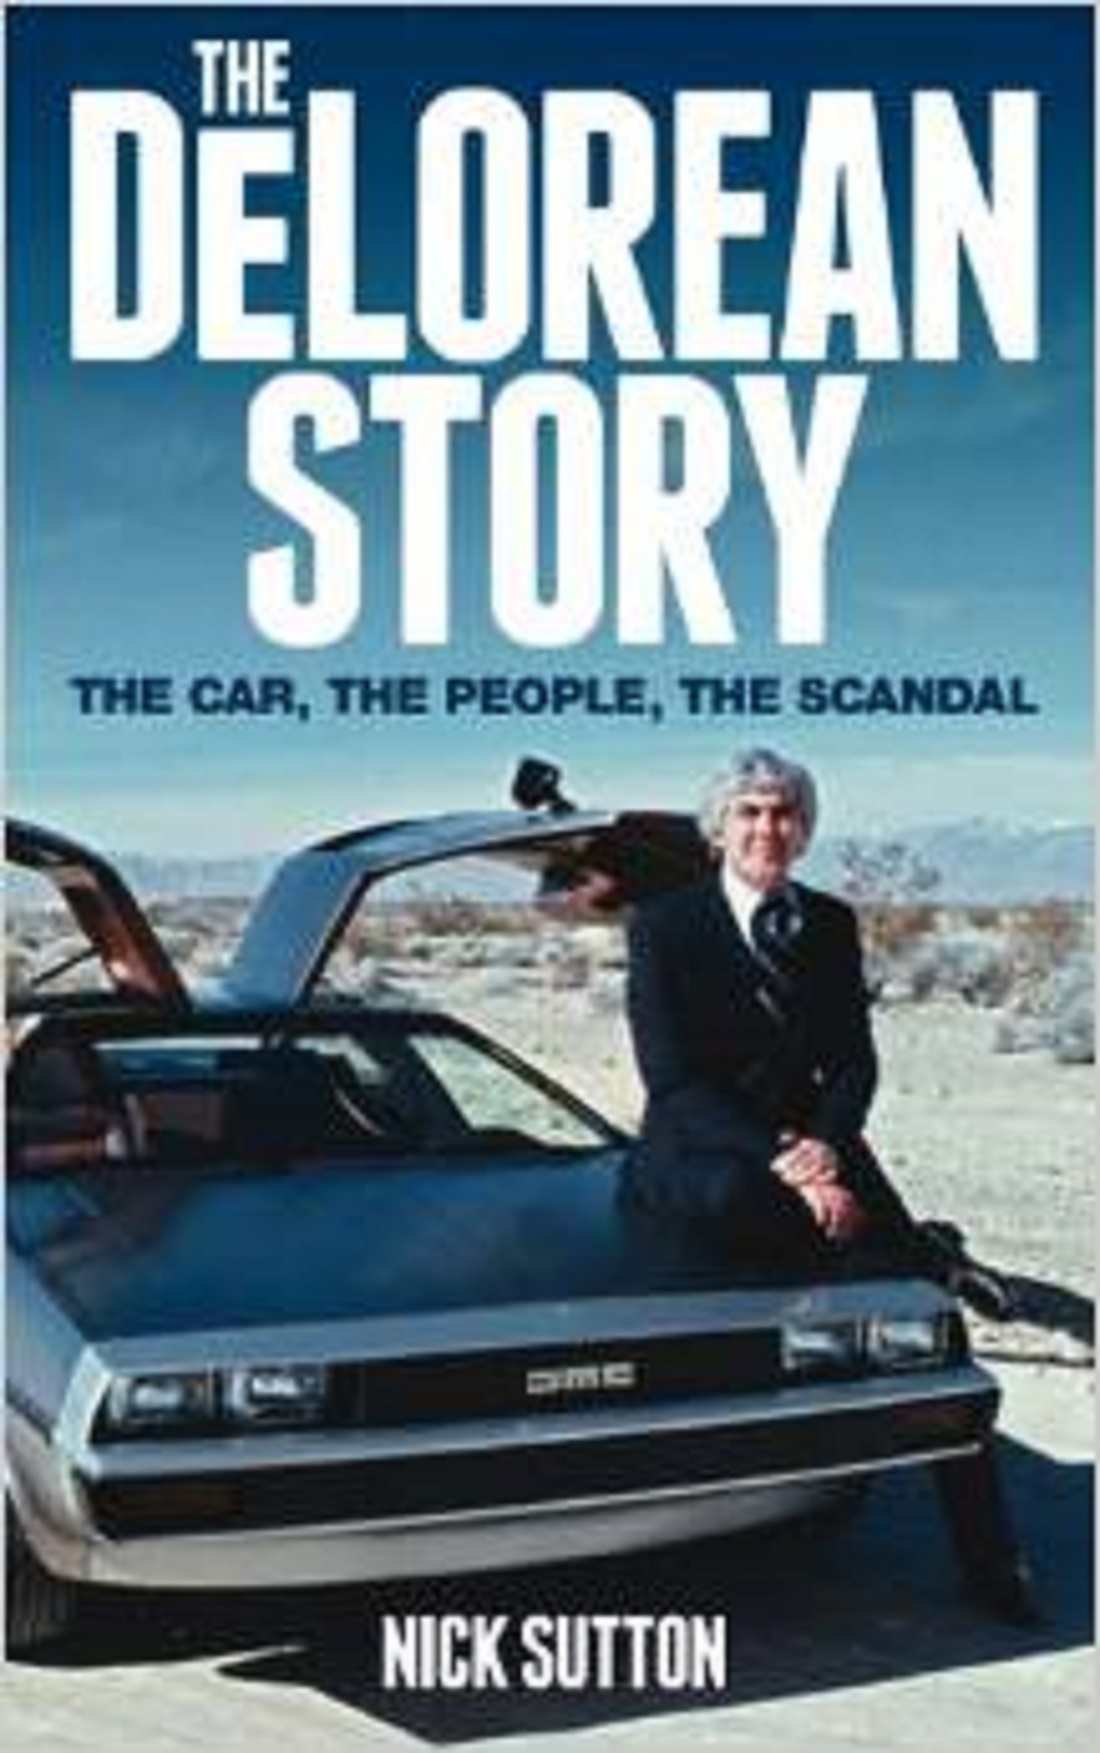 The DeLorean Story: The Car, the People, the Scandal